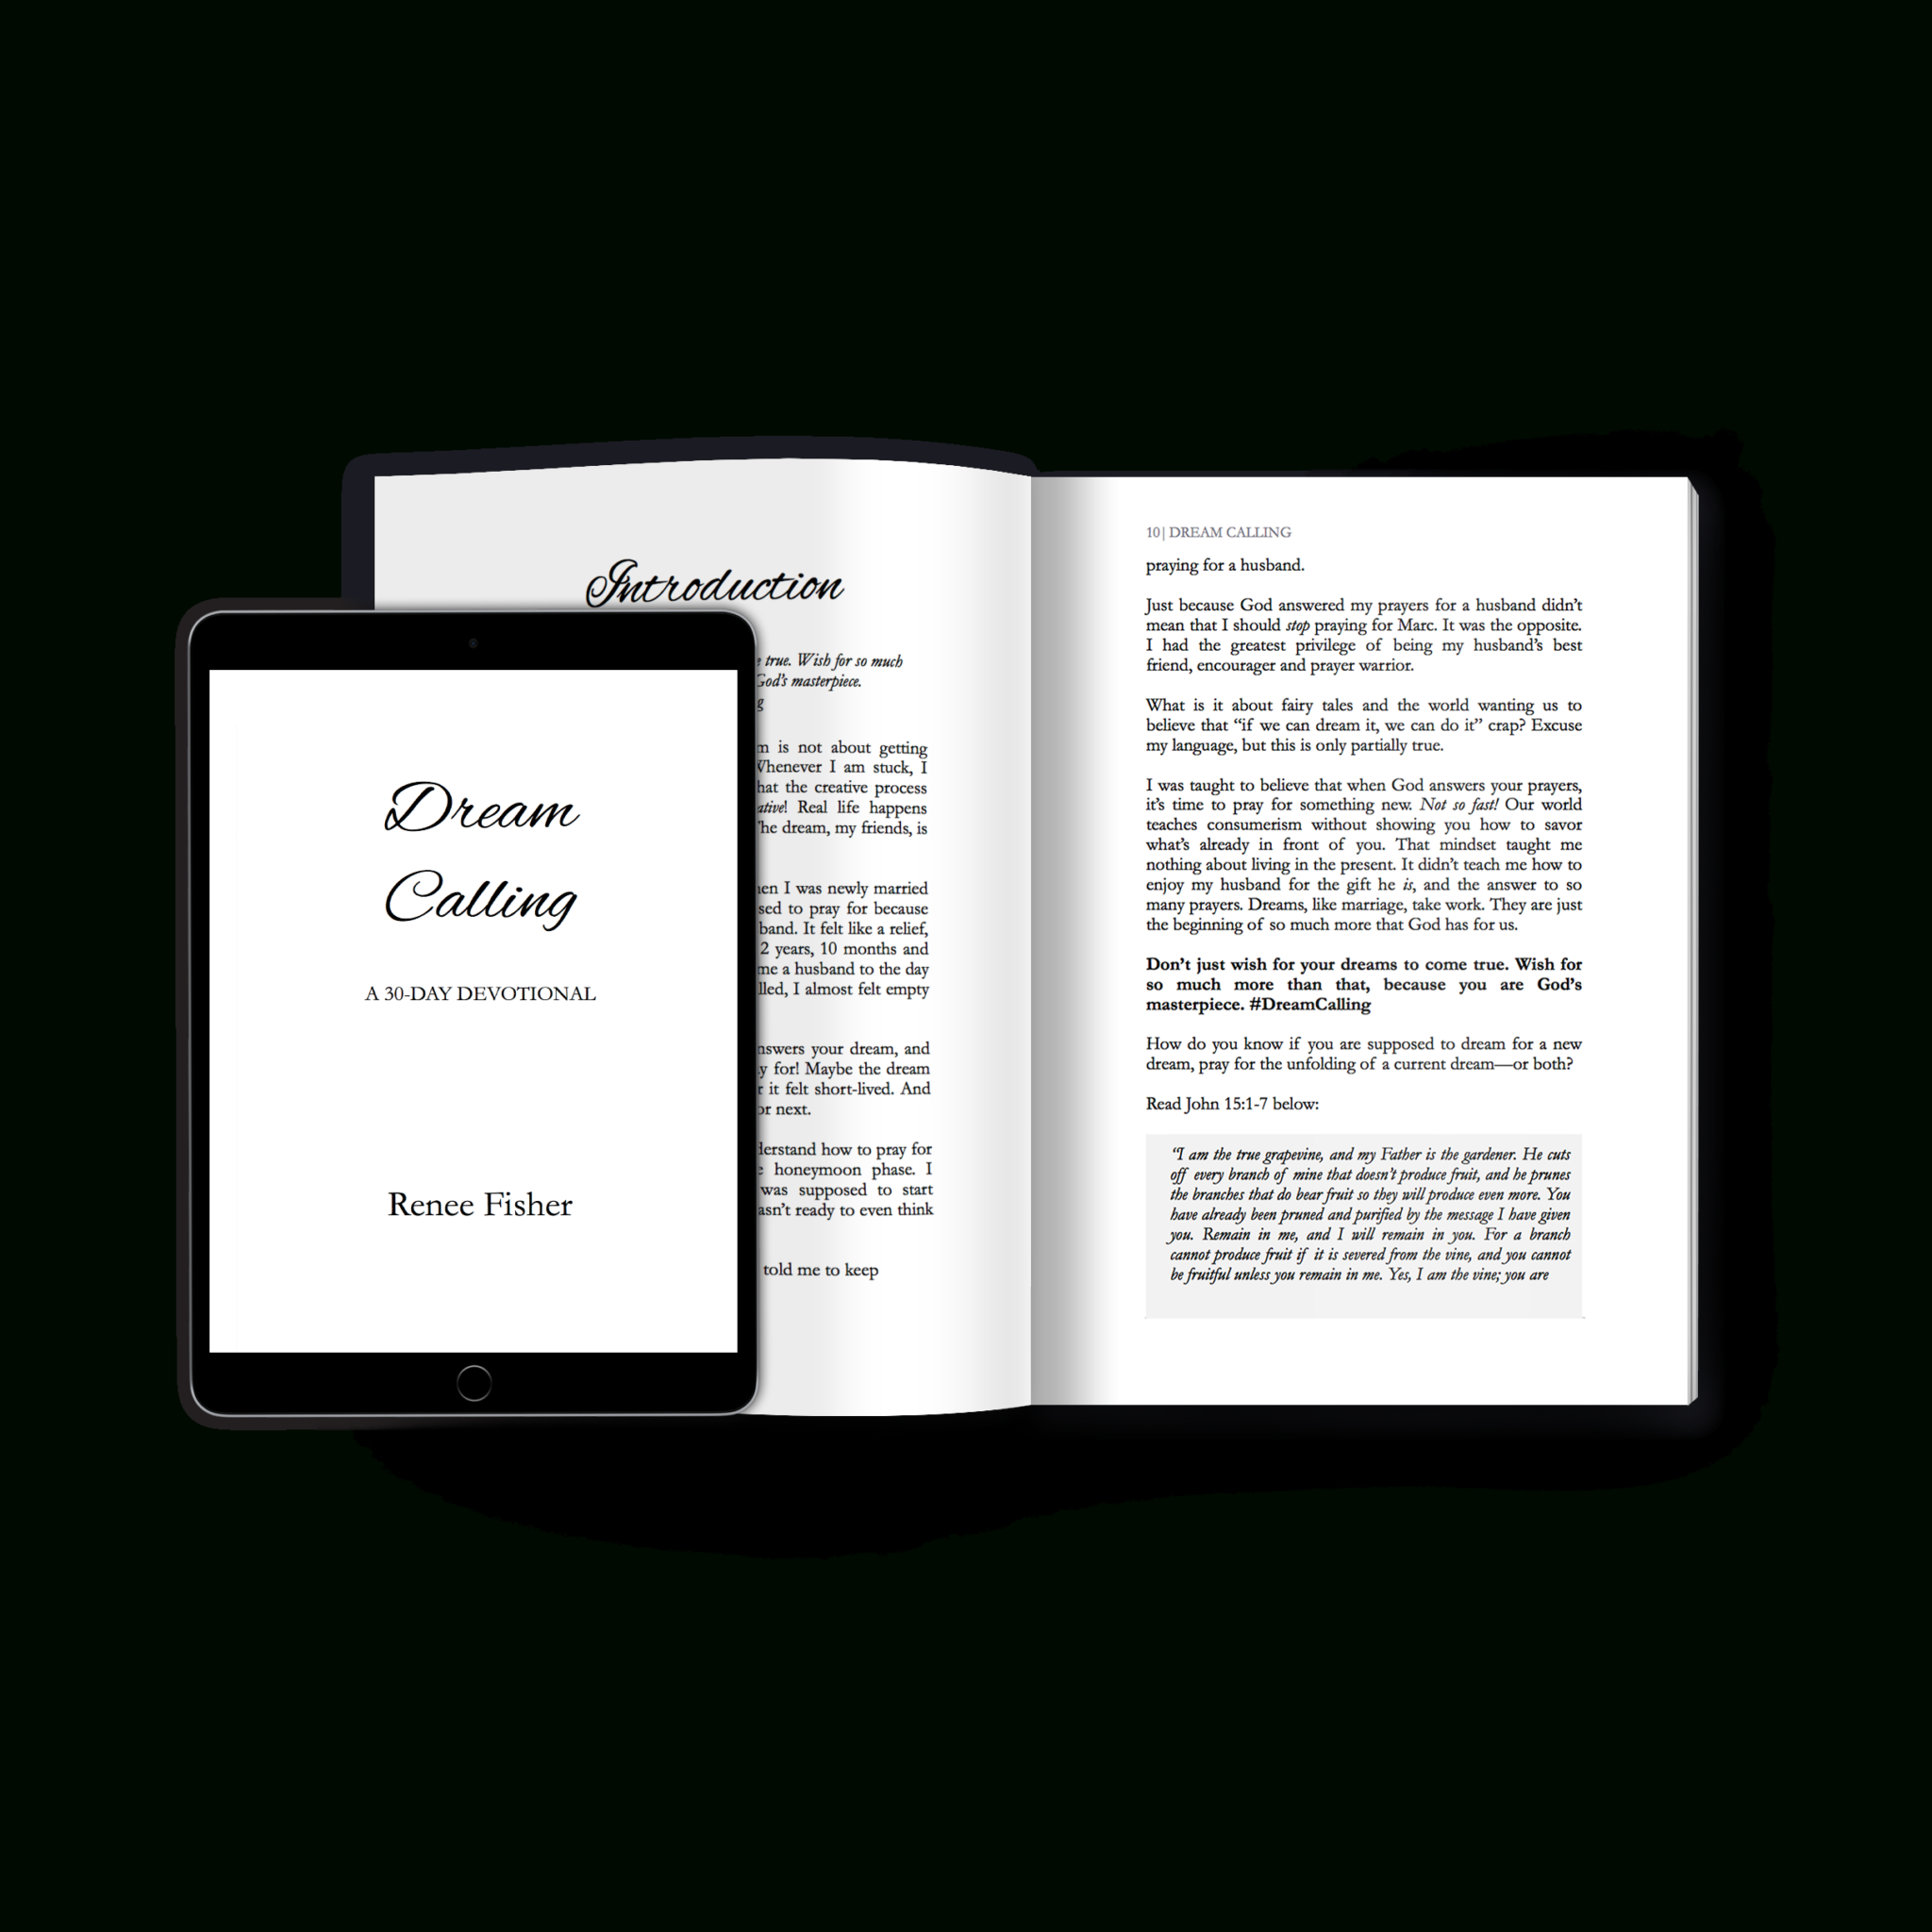 6X9 Book Template For Word